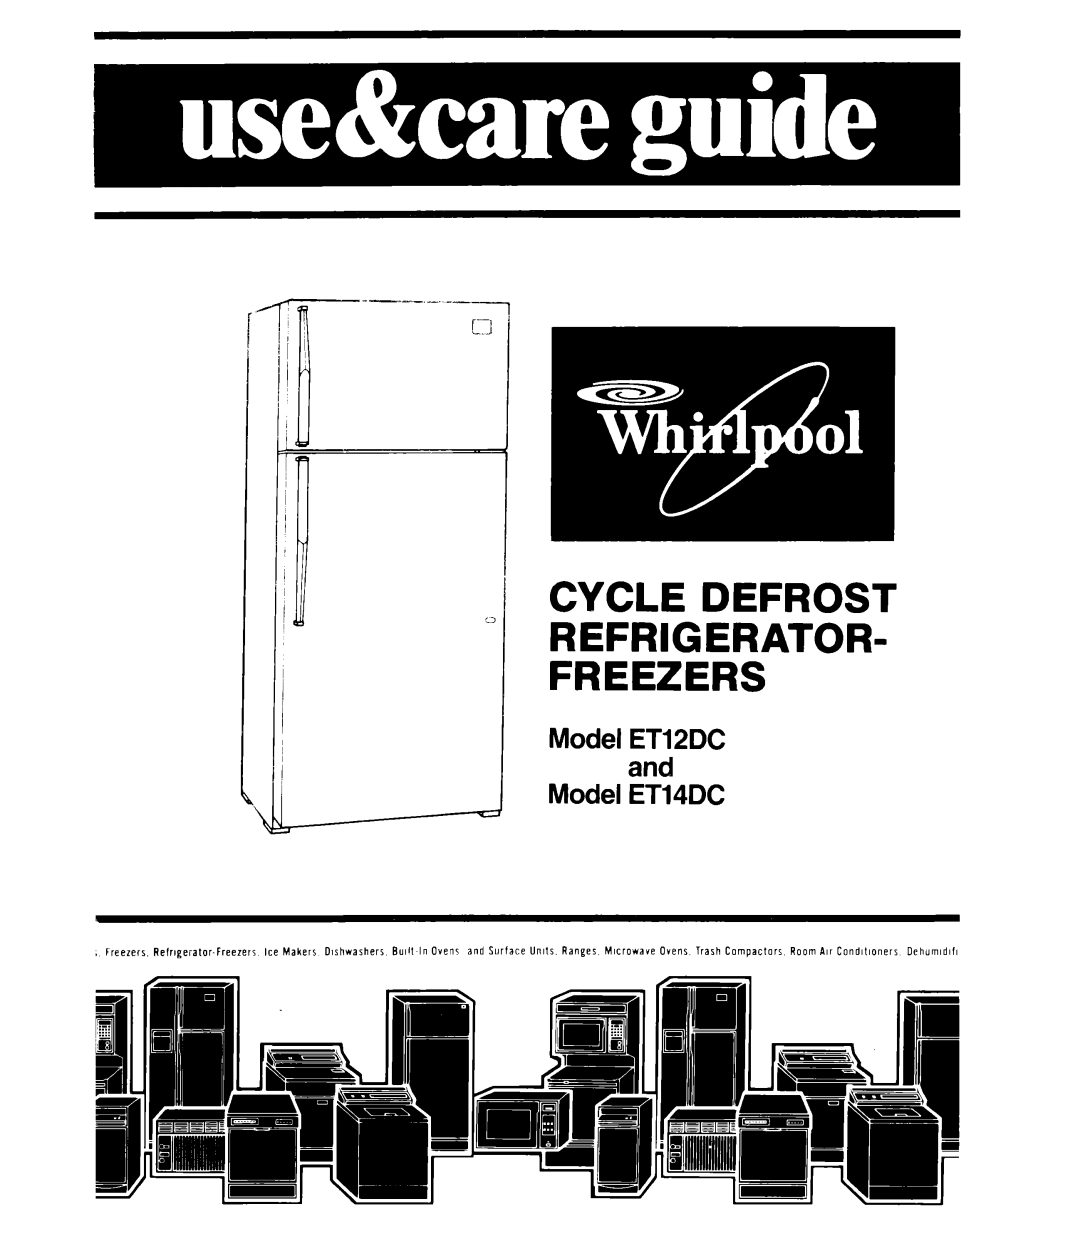 Whirlpool manual CYCLE DEFROST c3 REFRIGERATOR FREEZERS, Model ET12DC and Model ET14DC, I i ’ Ill 